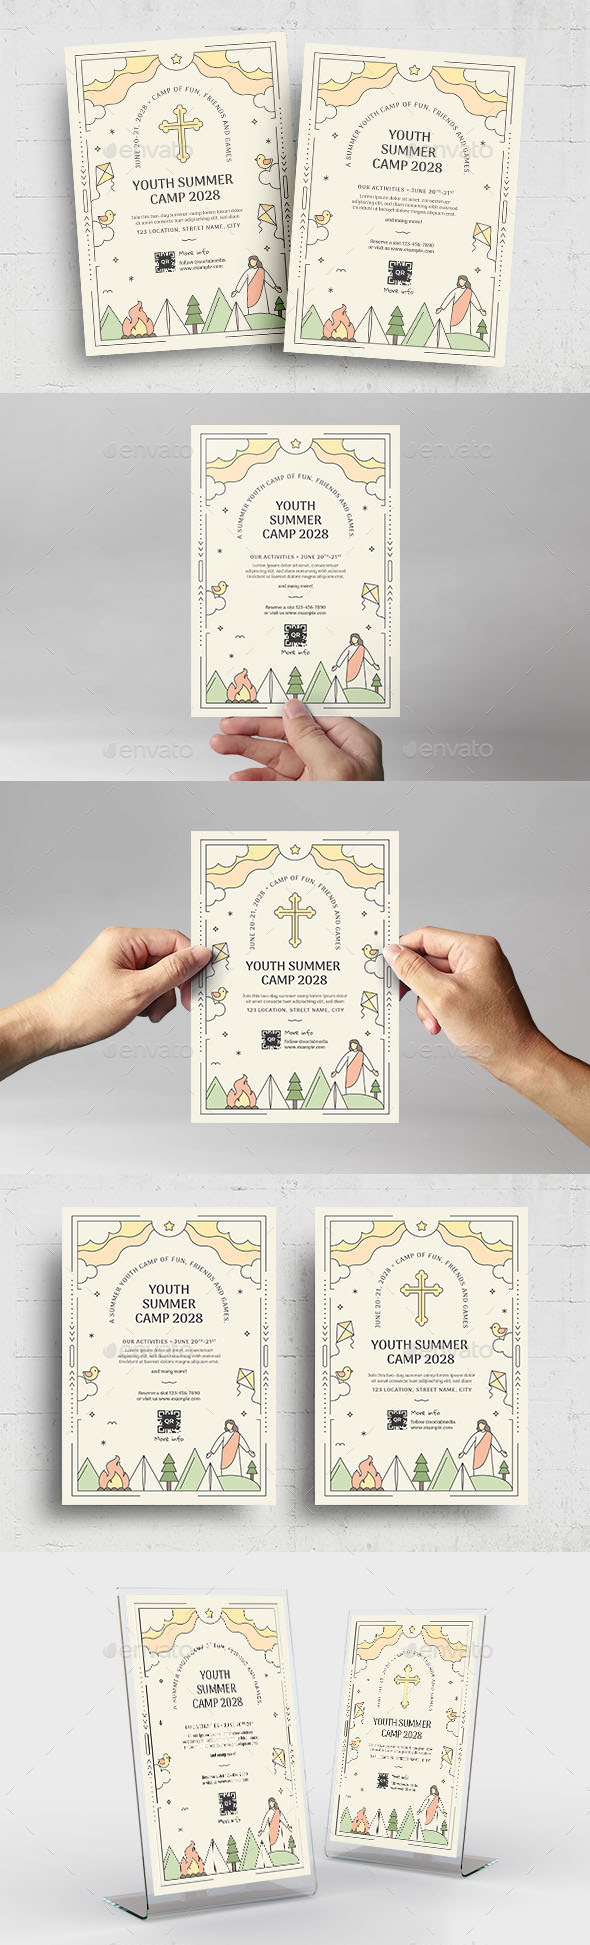 Church Youth Camp Flyer Template